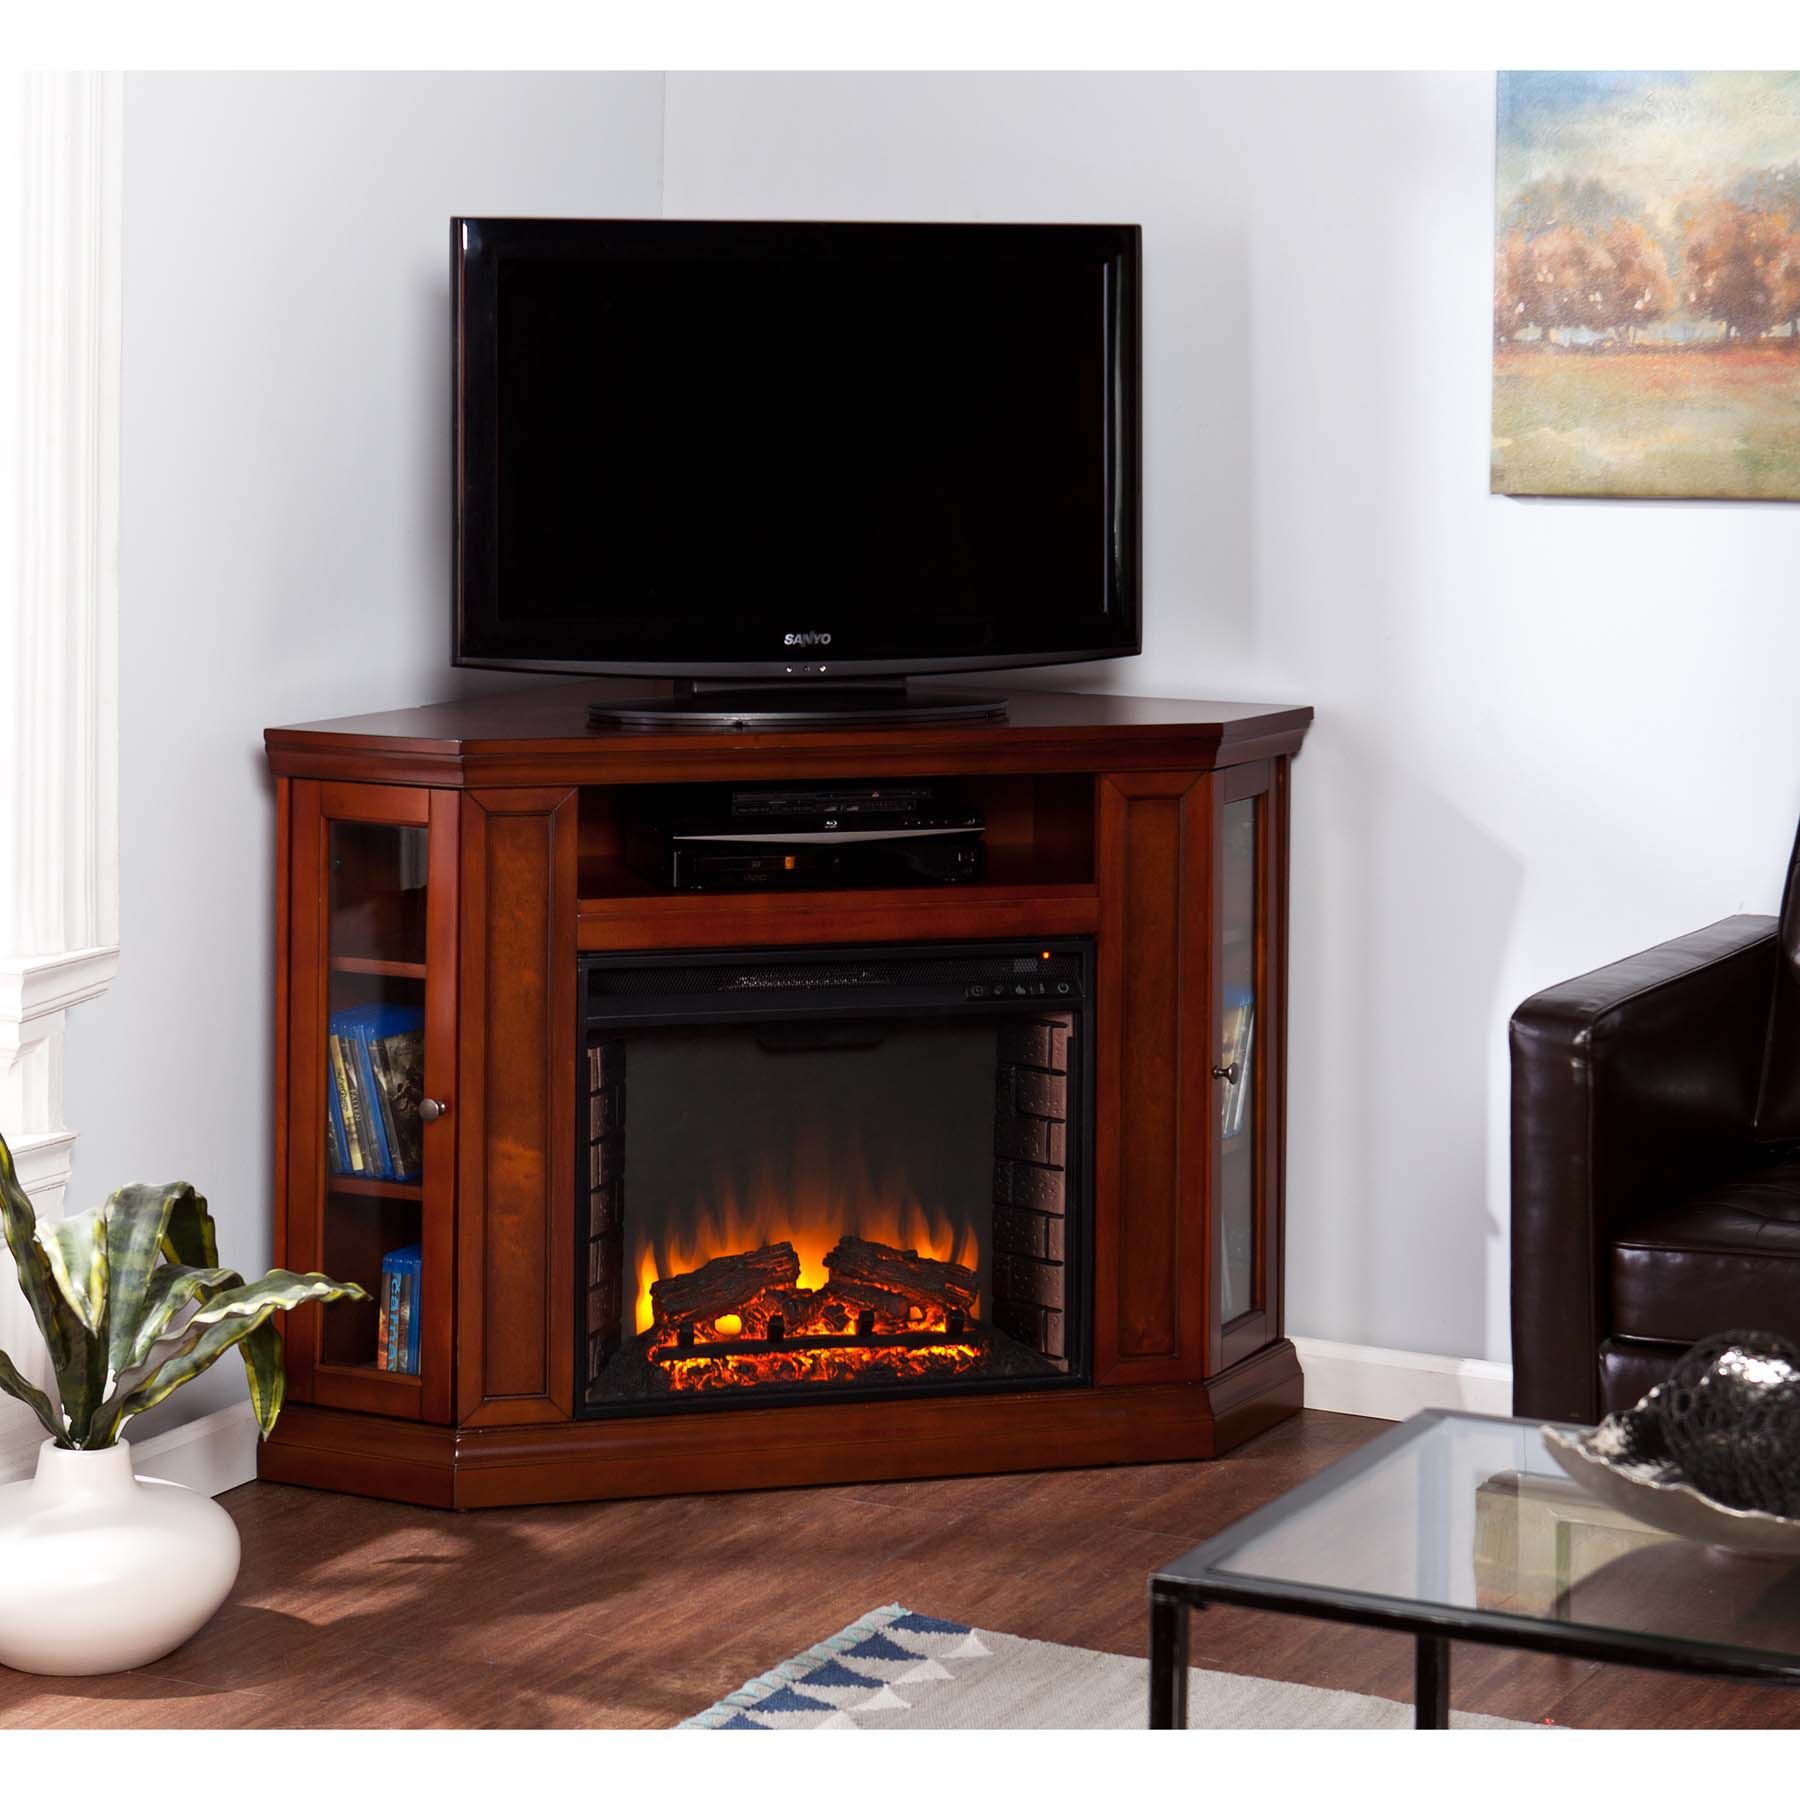 Plug In Fireplace New 42 Best Rustic Fireplace Images